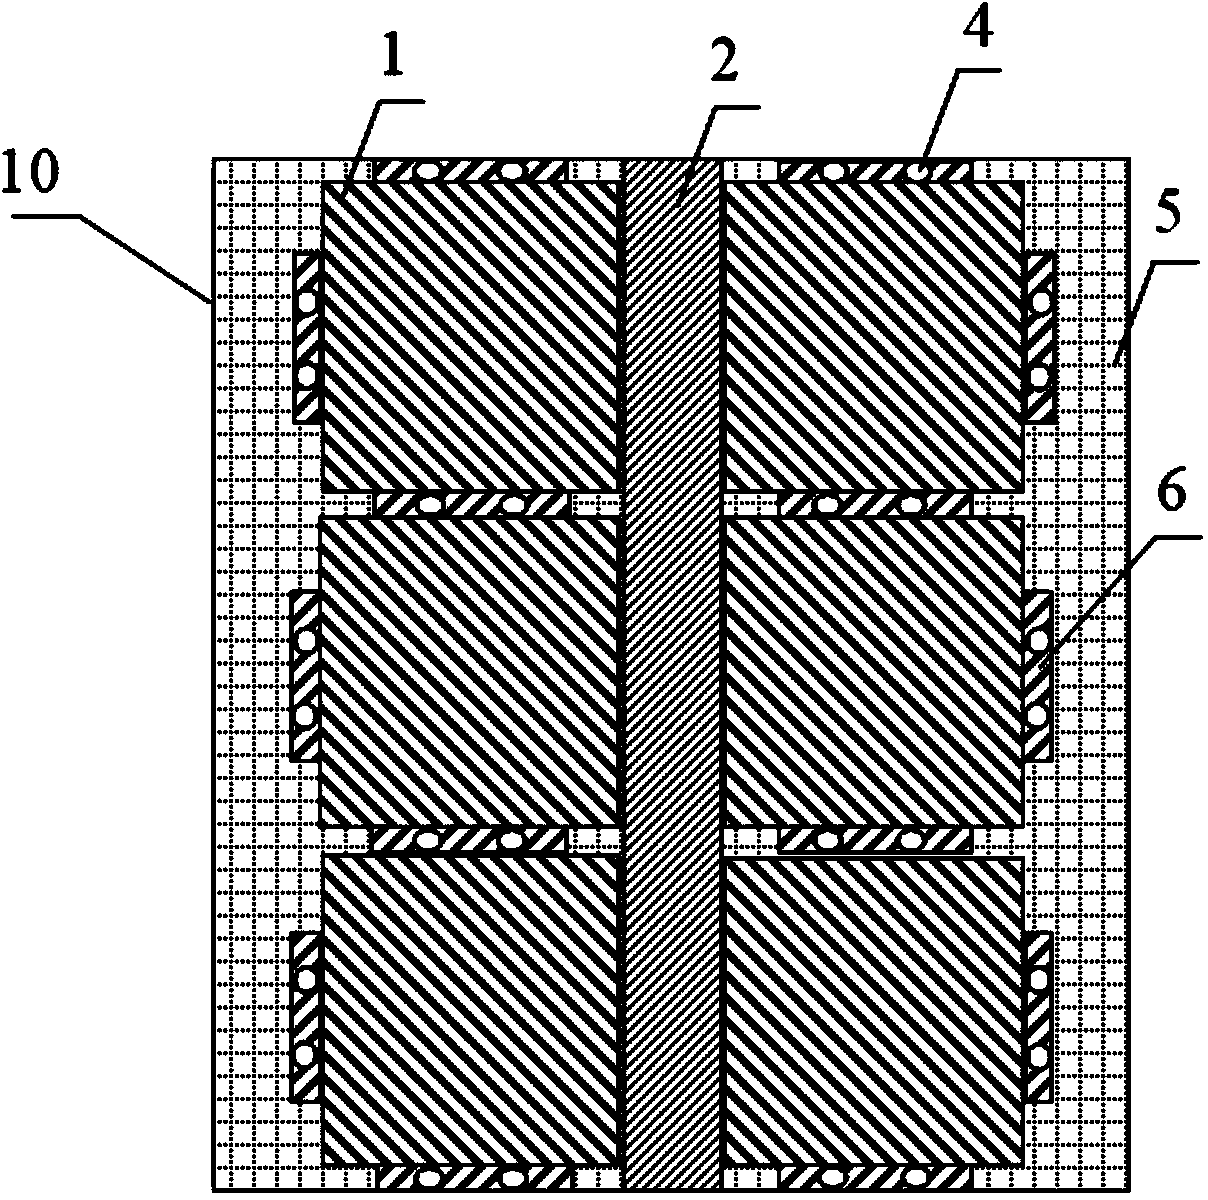 Battery heat management system with heat pipes with temperature self-adaption function coupled to single-phase liquid loop to transfer heat